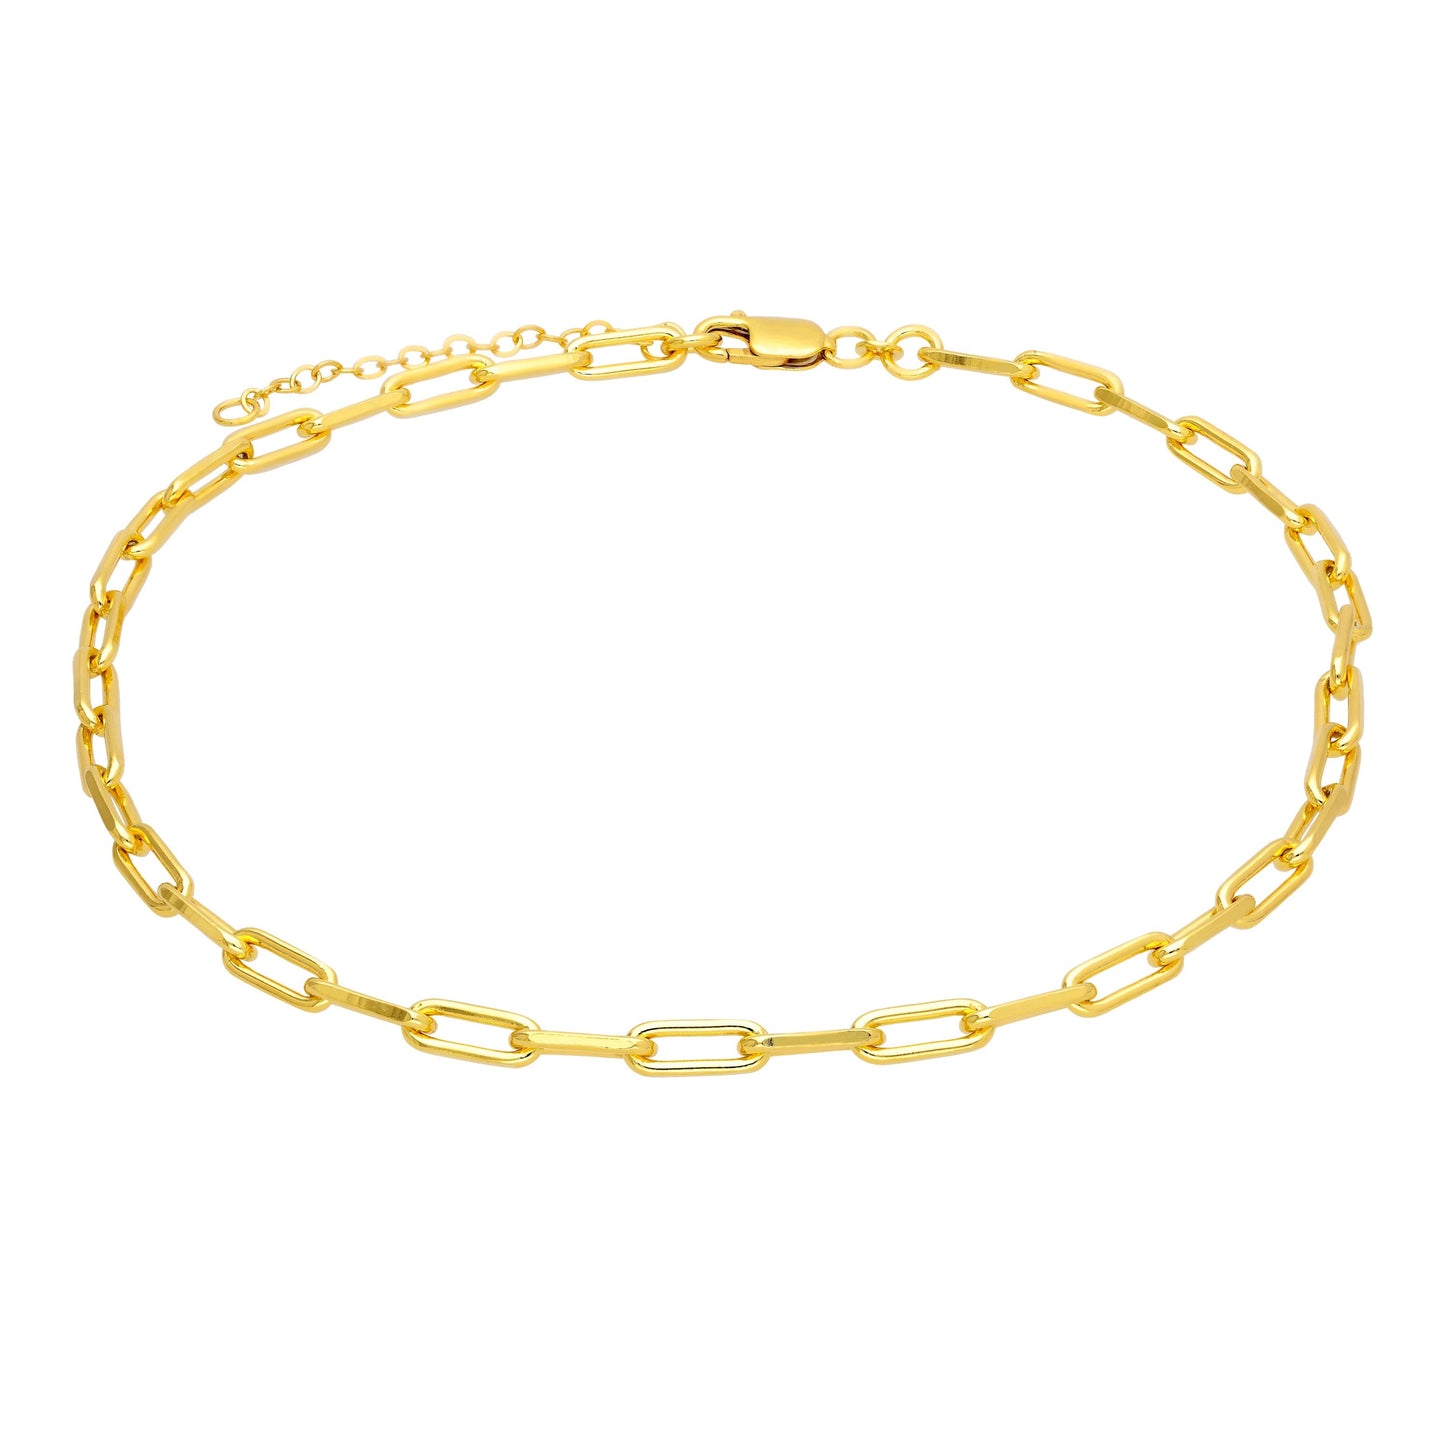 Gold Plated Sterling Silver Long Link Choker Necklace 14-16"